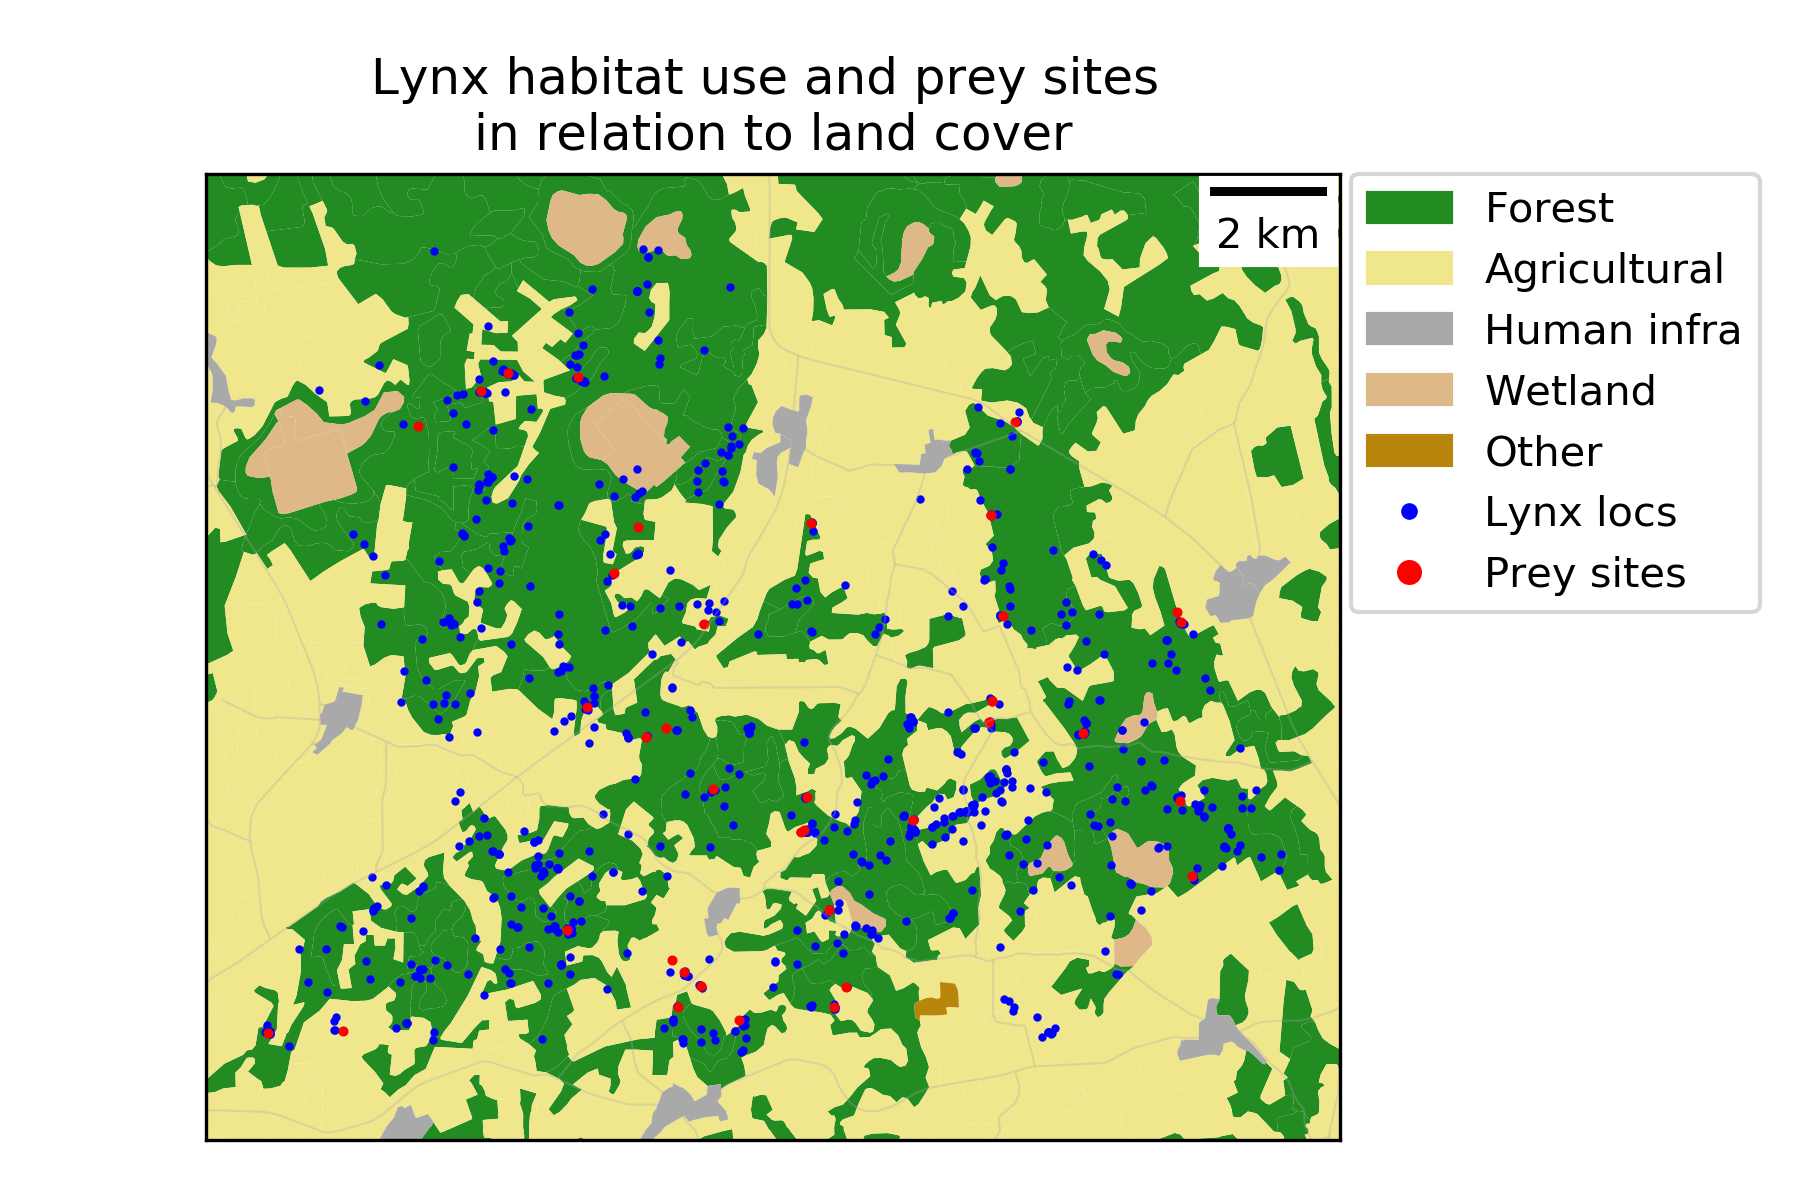 ../../_images/Lynx_habitat_use_and_land_cover_R.Kont.png